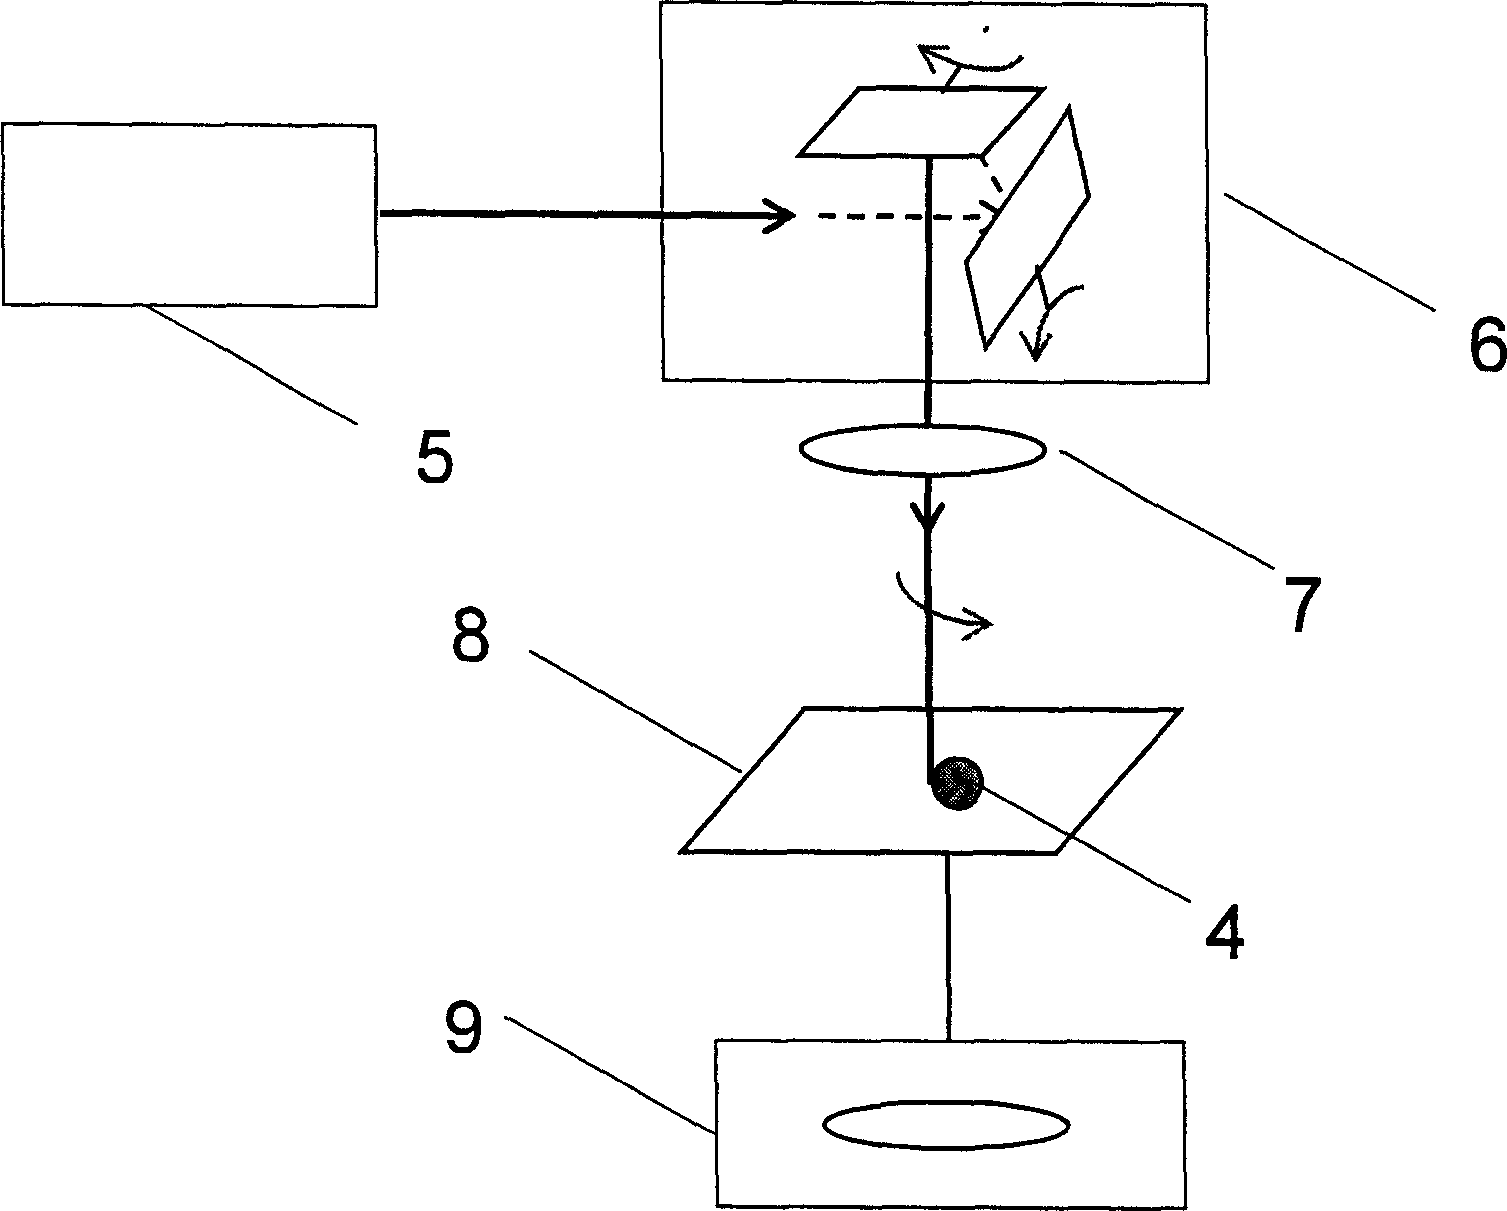 Laser cell microoperation control method and device for metal particle